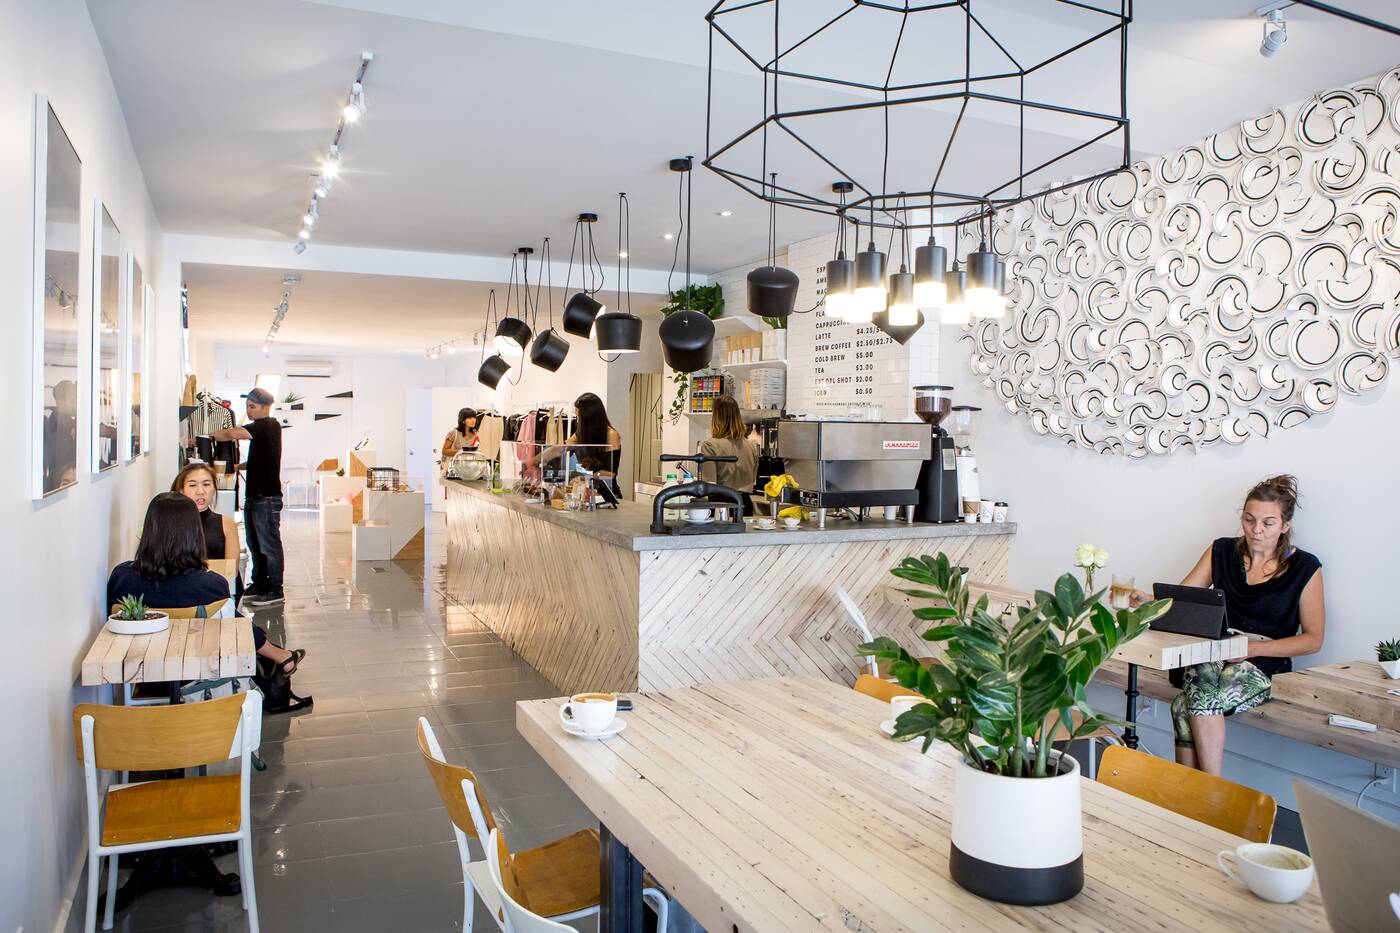 10 new coffee shops with the best interior design in Toronto